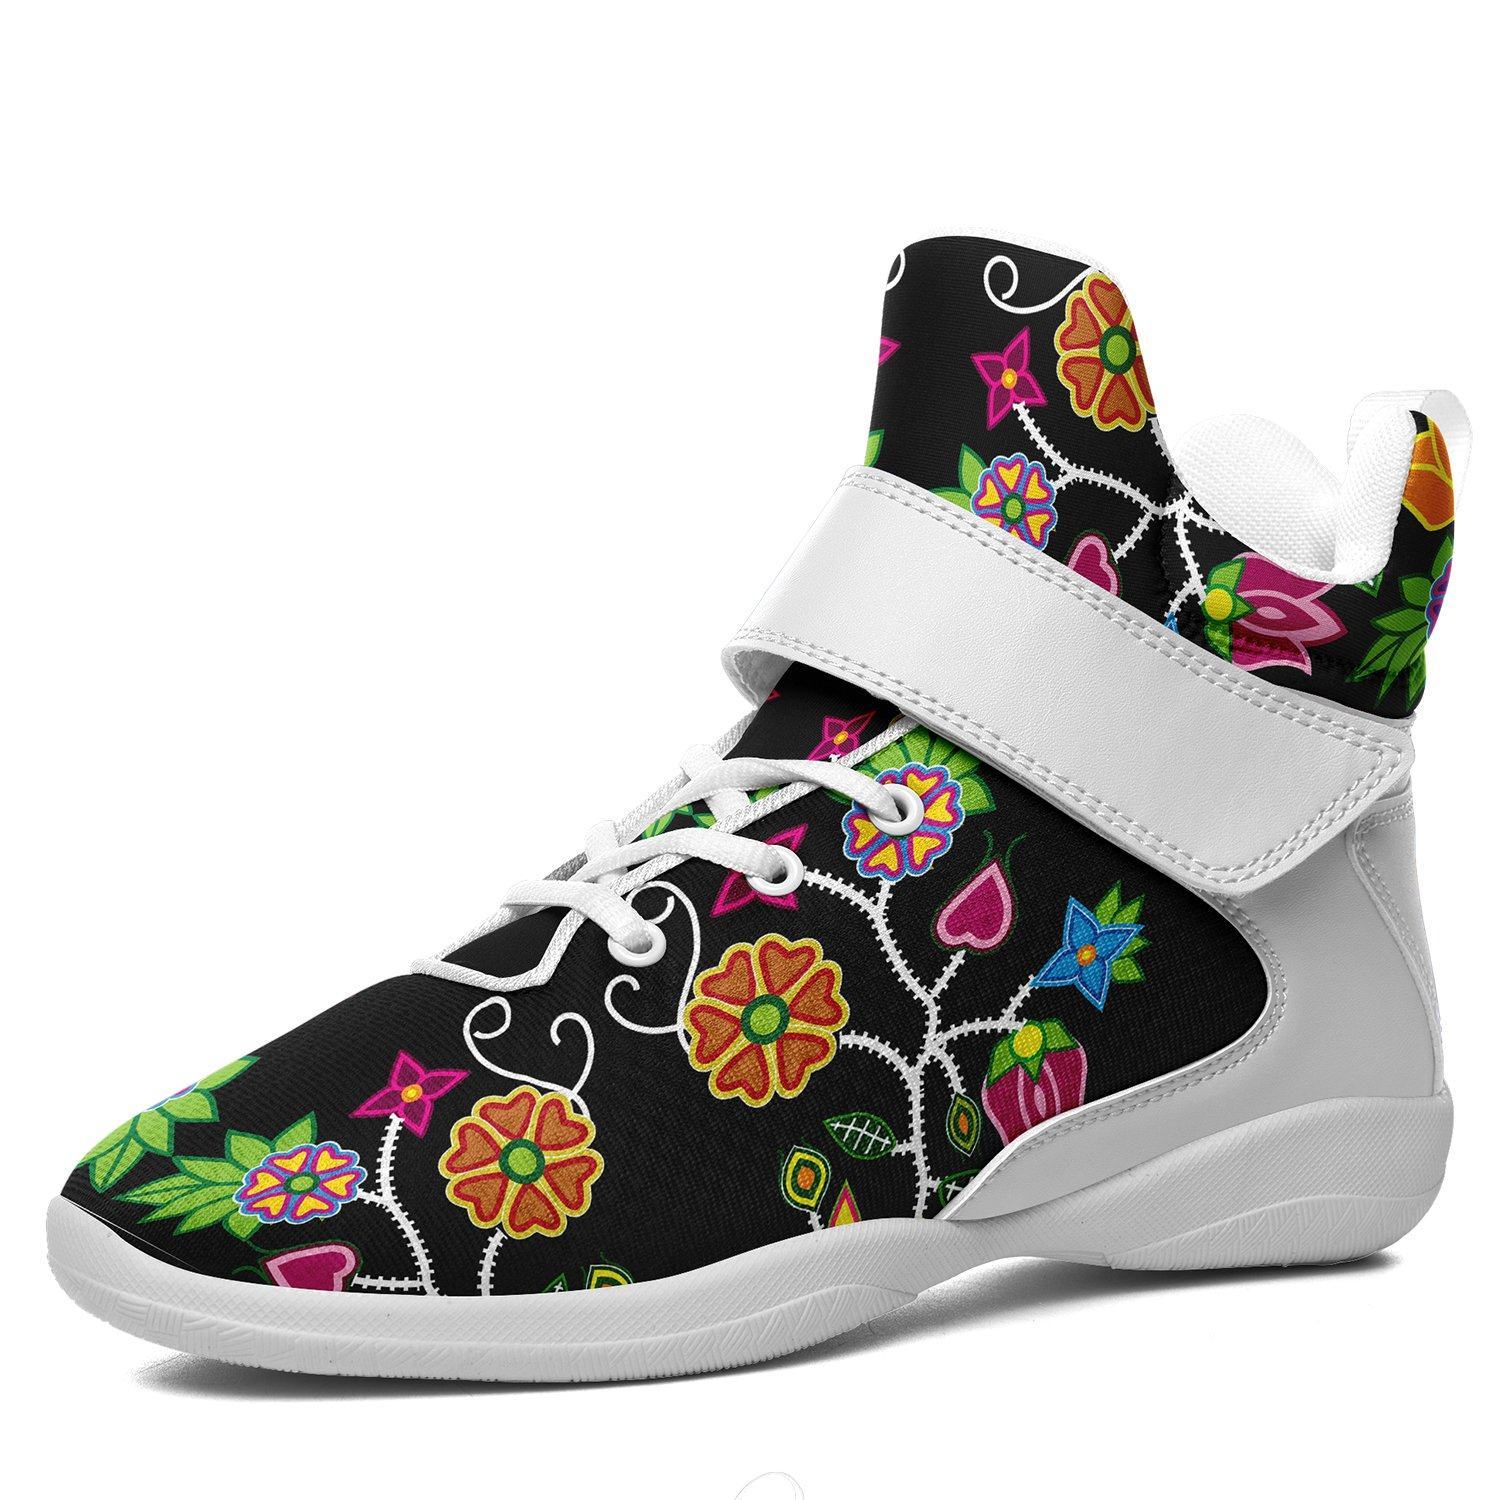 Floral Beadwork Kid's Ipottaa Basketball / Sport High Top Shoes 49 Dzine US Child 12.5 / EUR 30 White Sole with White Strap 